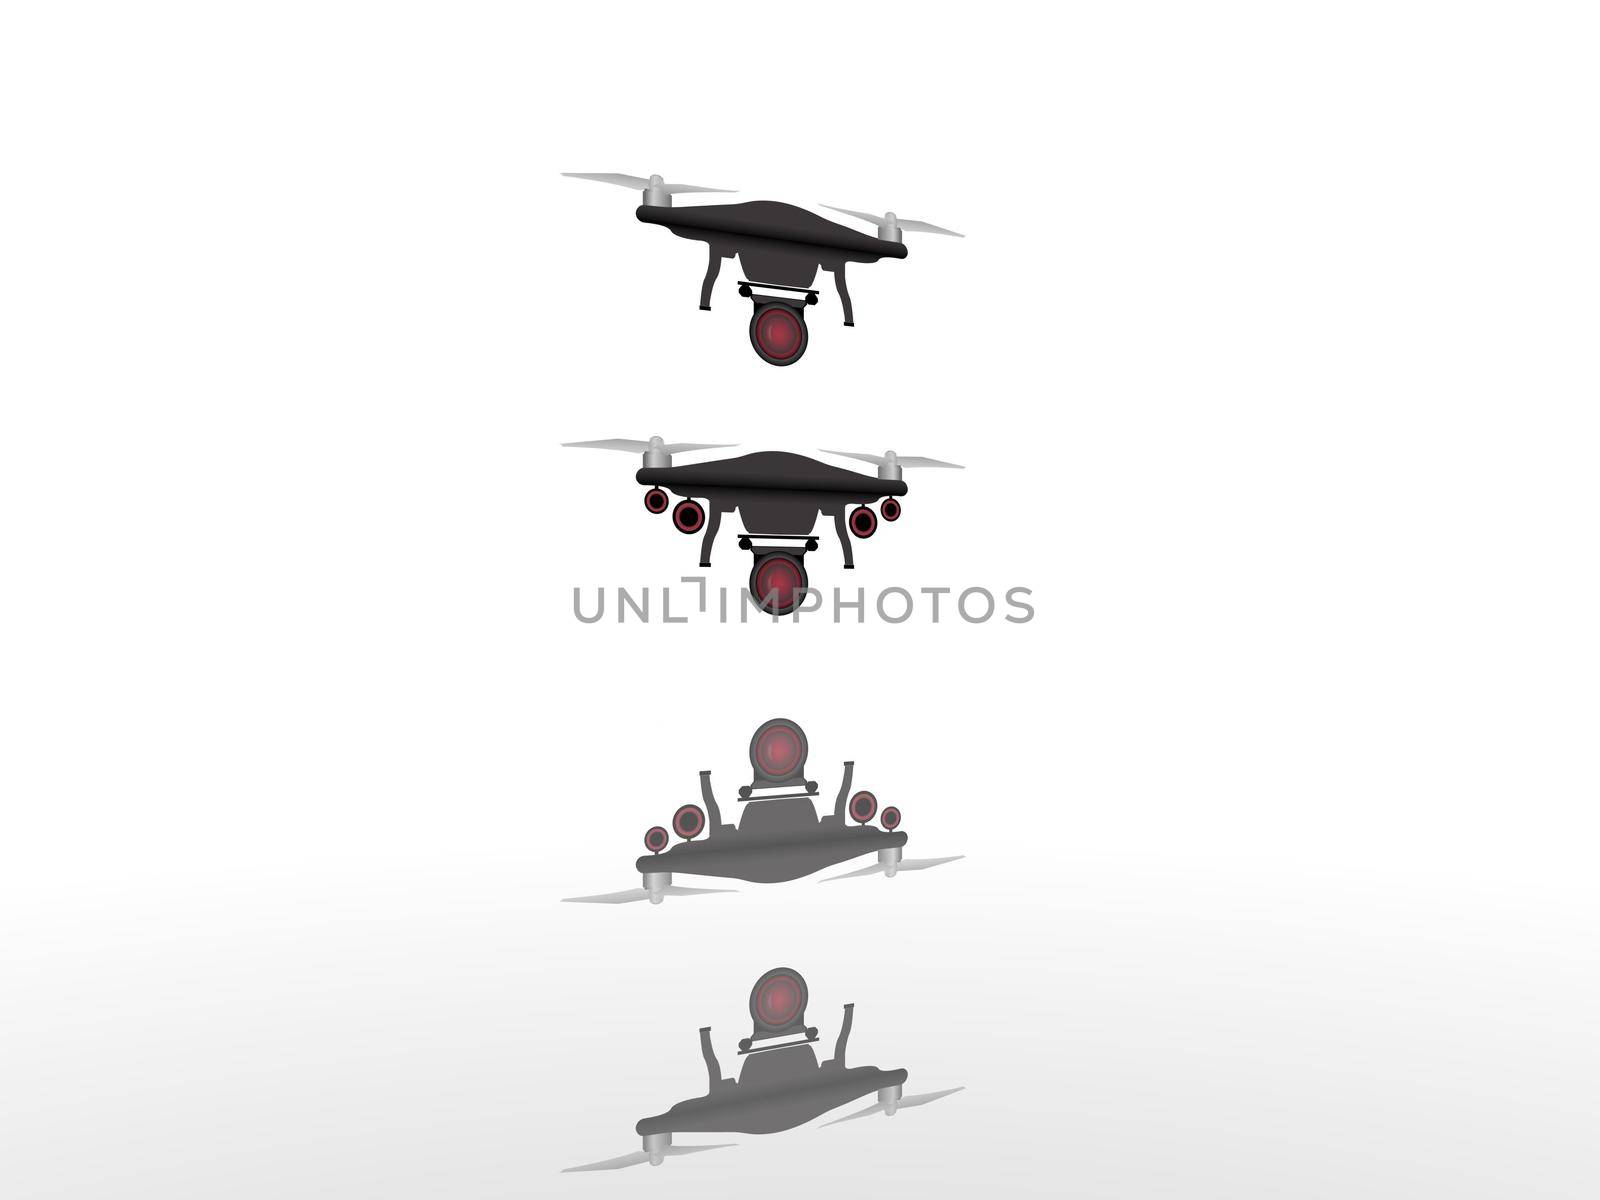 camera drone on white background - 3d rendering by mariephotos